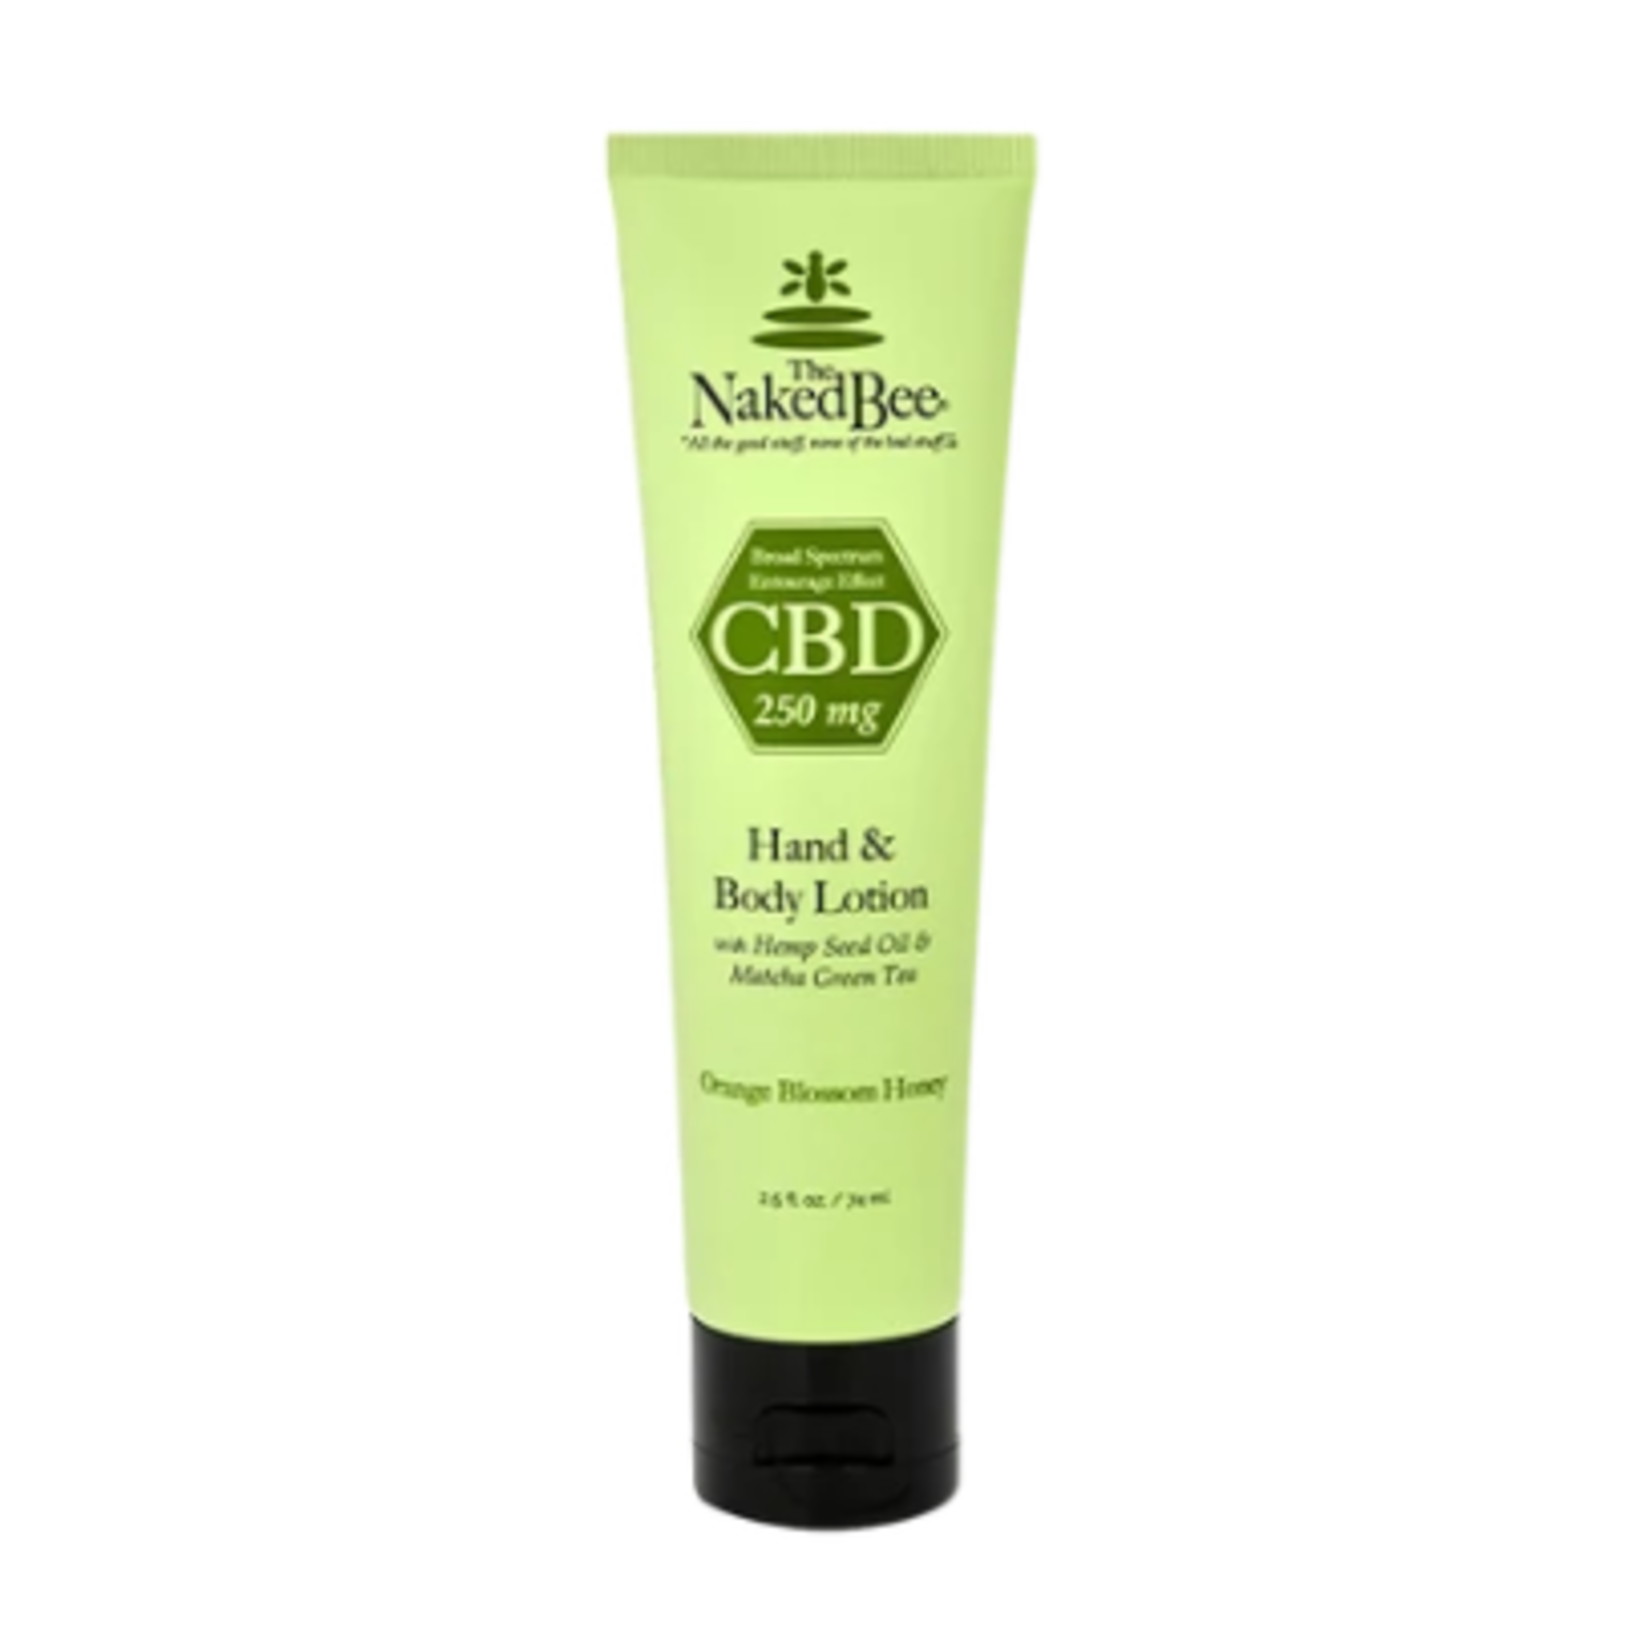 The Naked Bee The Naked Bee CBD 250mg Hand & Body Lotion